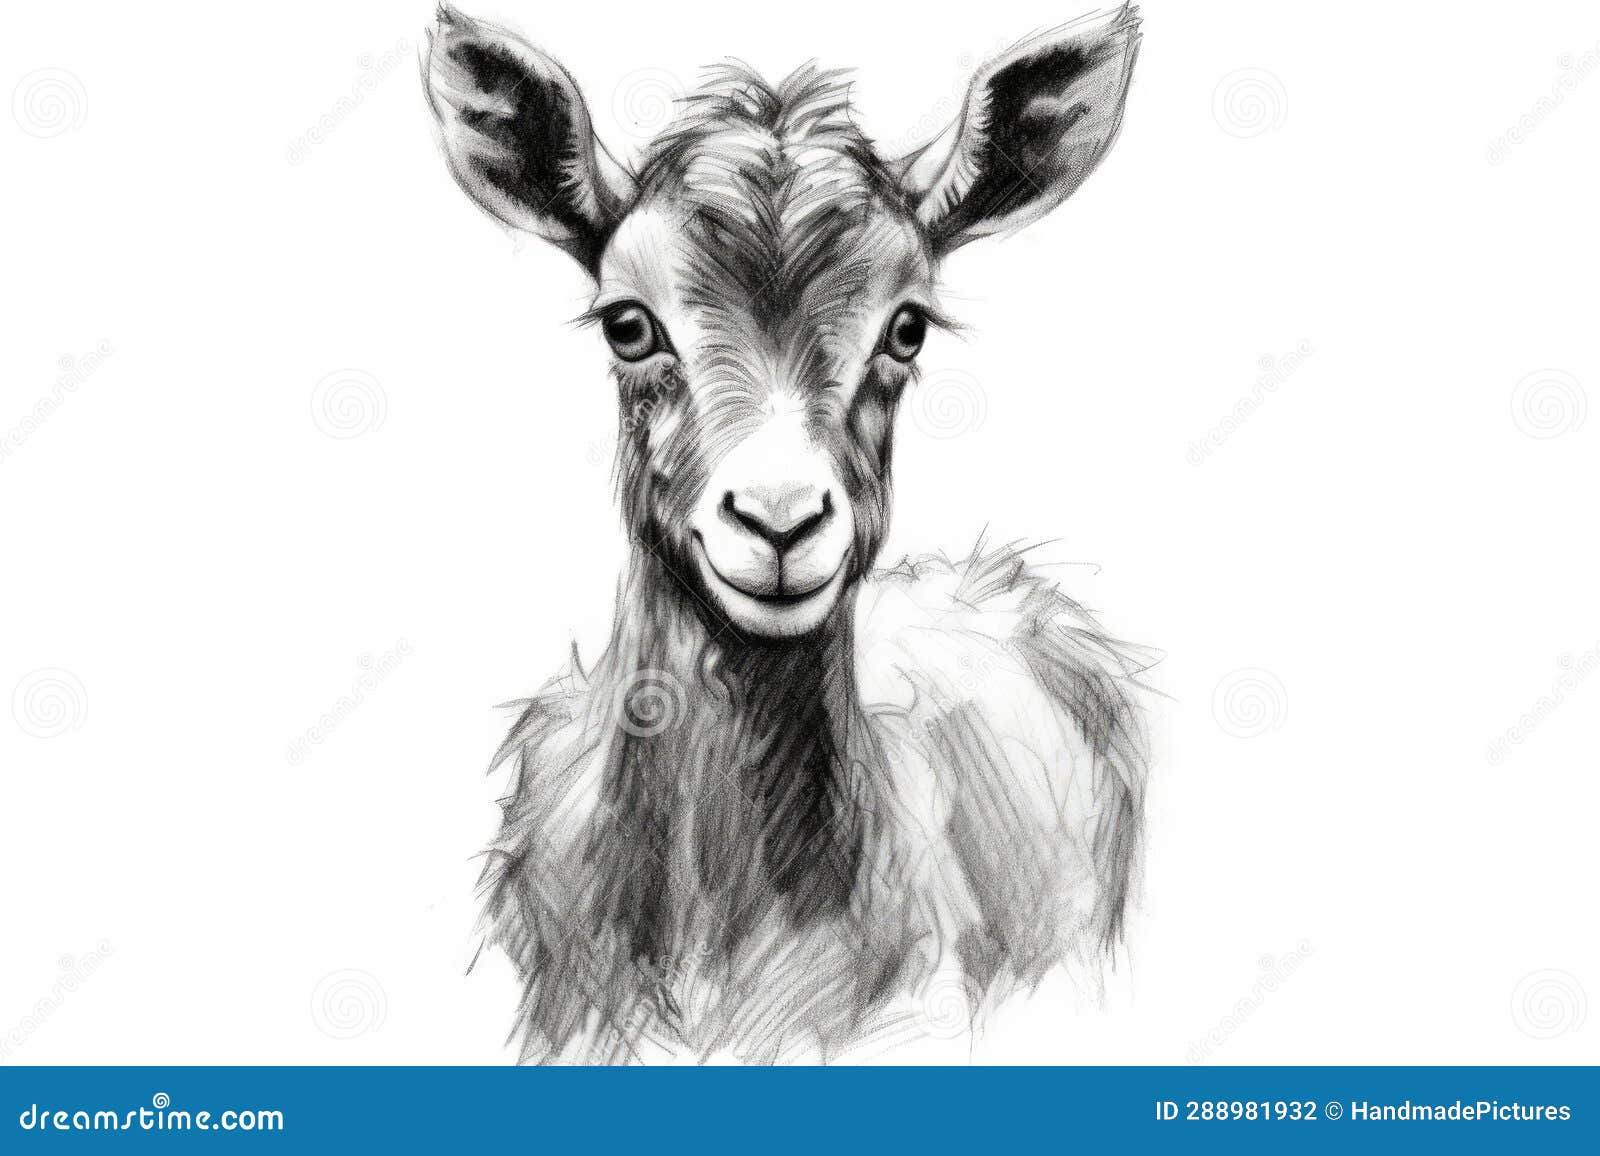 Goat Outline Images, Pictures